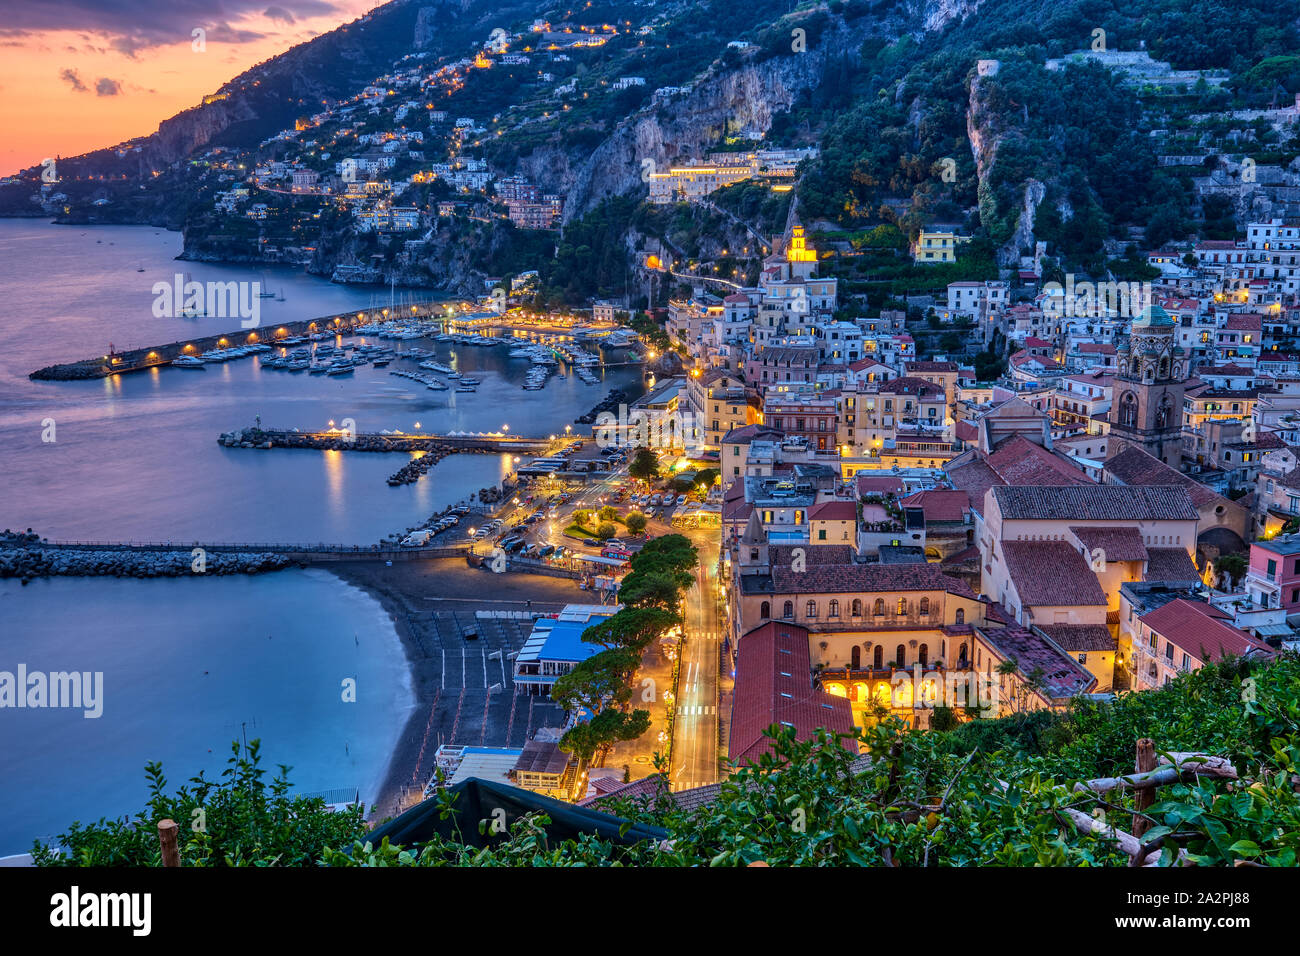 View of Amalfi after sunset on the coast of the same name in Italy Stock Photo